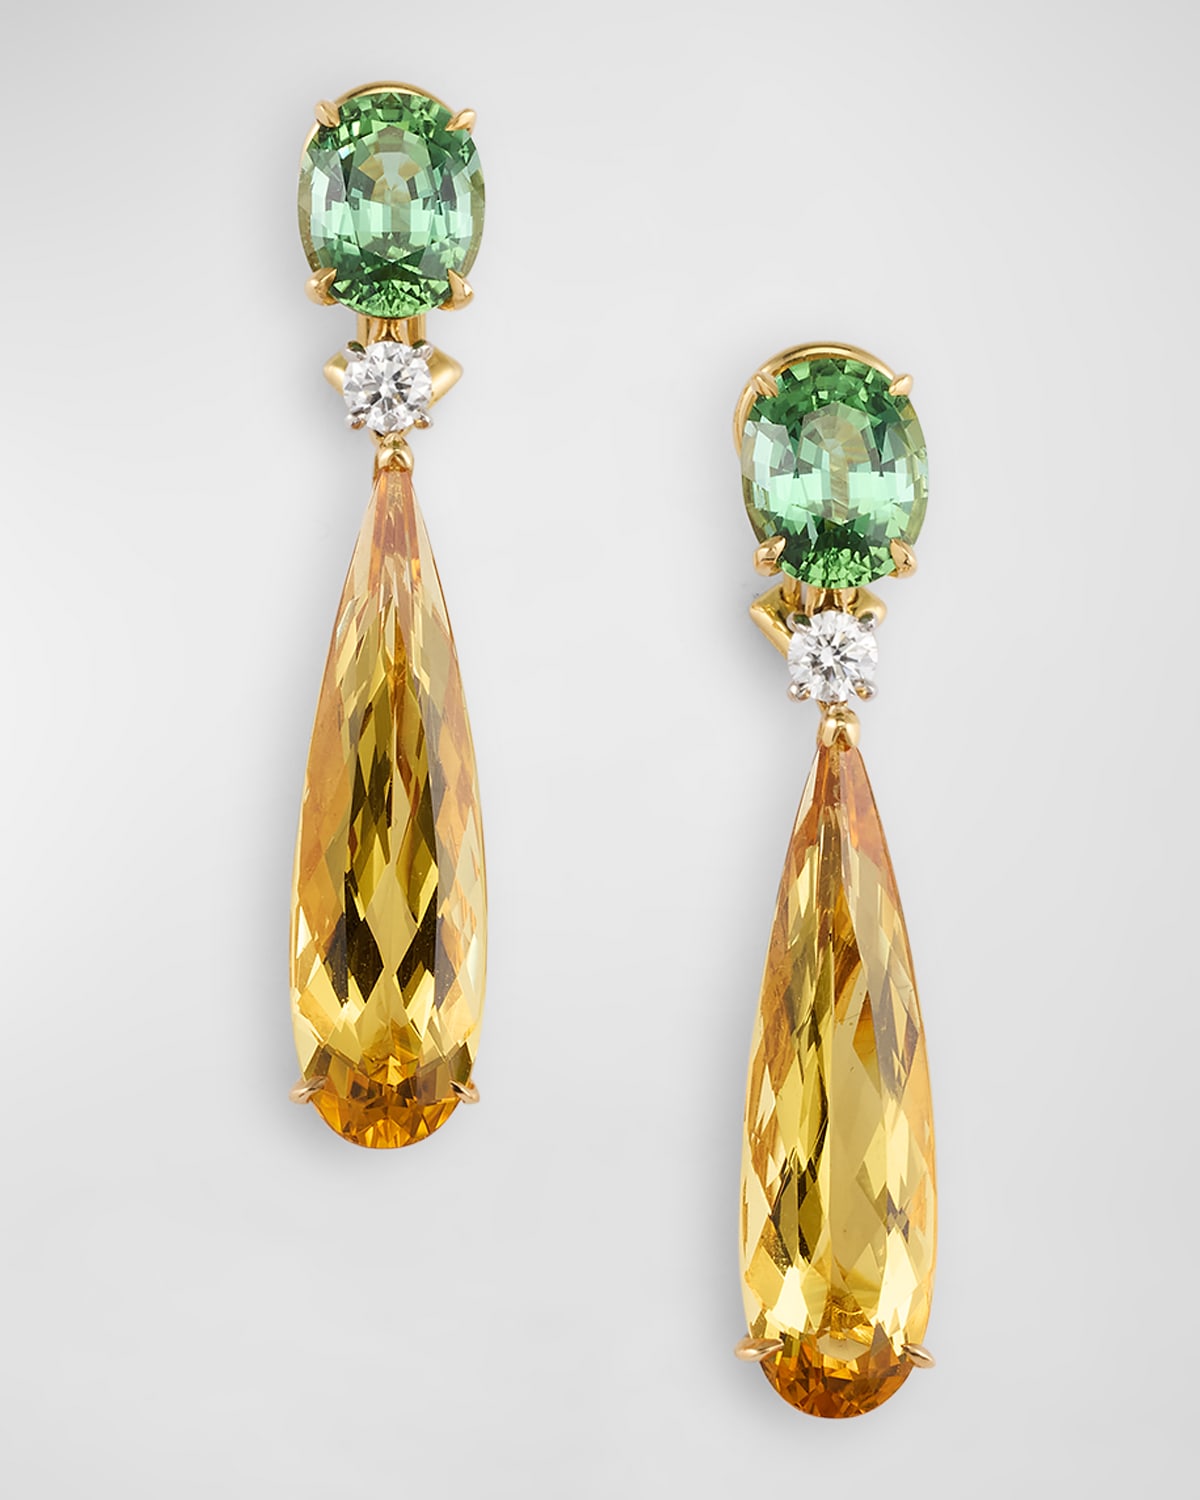 18K Yellow Gold and Platinum Clip Earrings with Beryl, Tourmaline and Diamonds